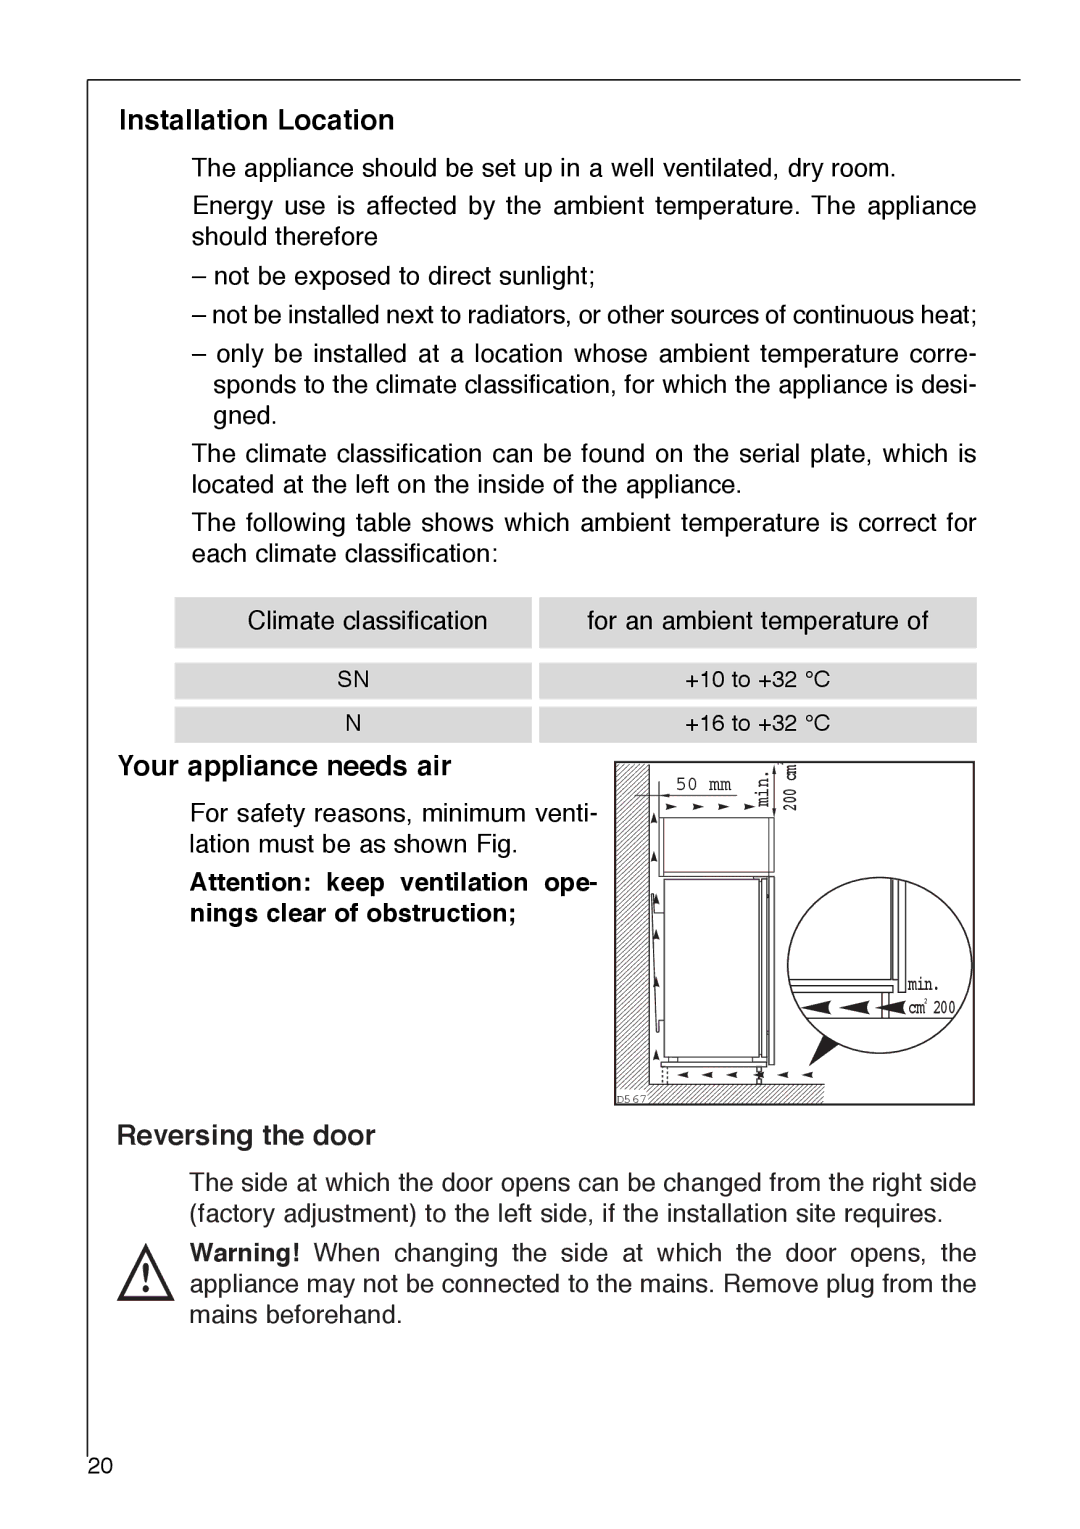 Electrolux SANTO 2842-6 i installation instructions Installation Location, Your appliance needs air, Reversing the door 